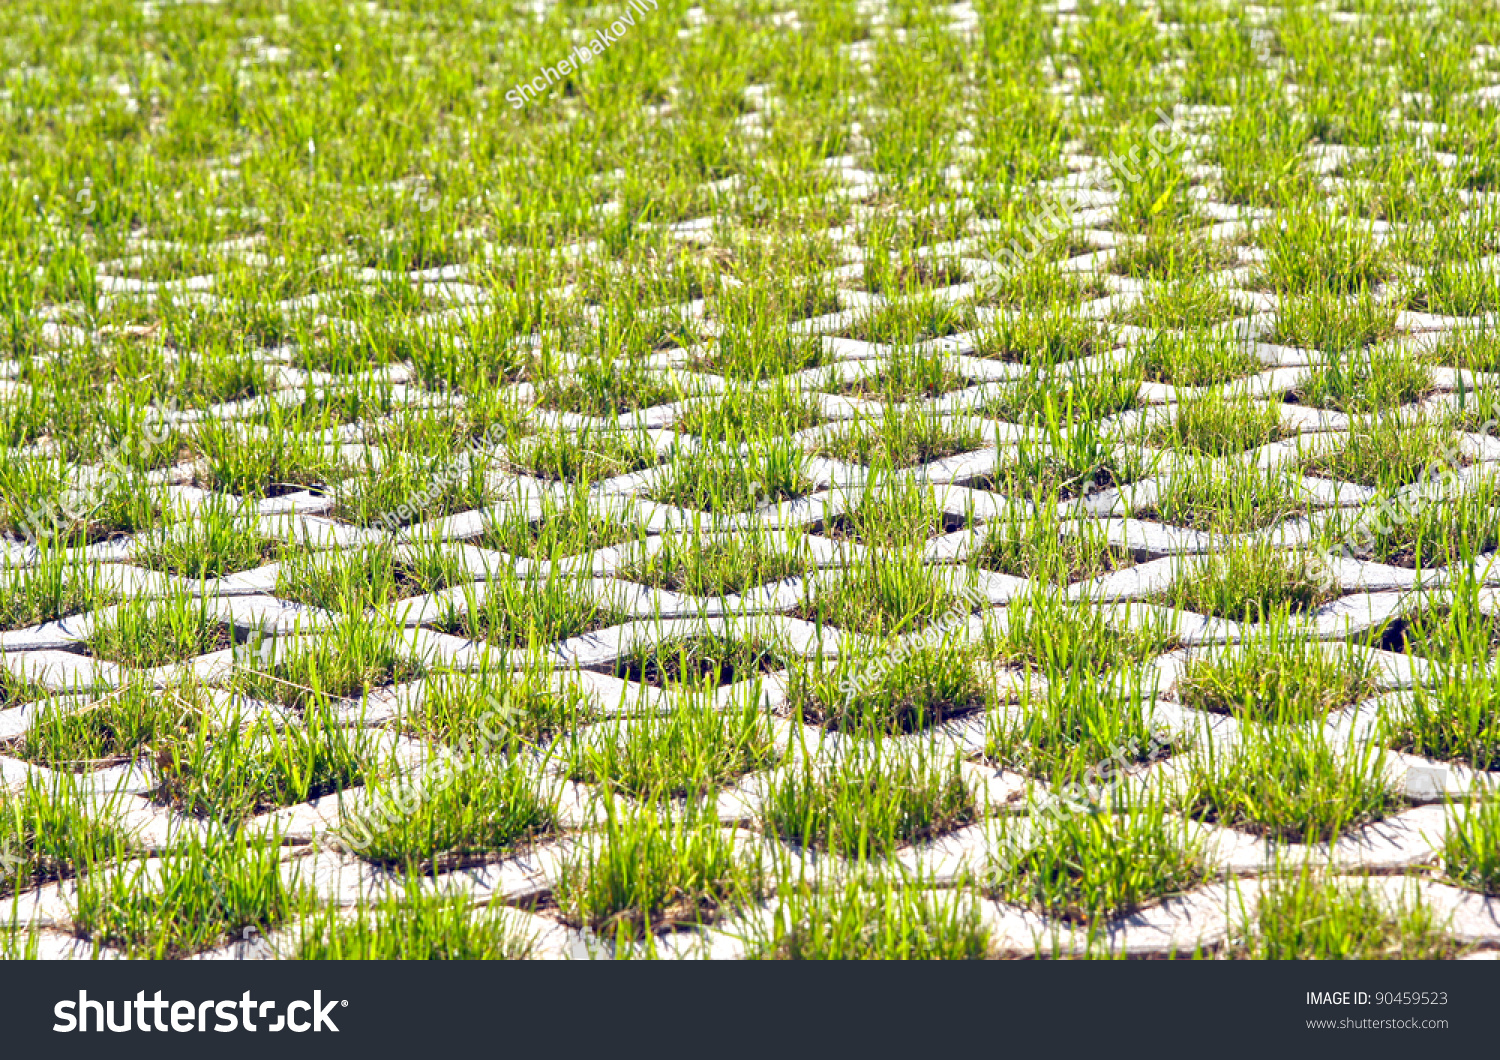 Ecological Parking Cars Green Grass Stock Photo (Edit Now) 90459523